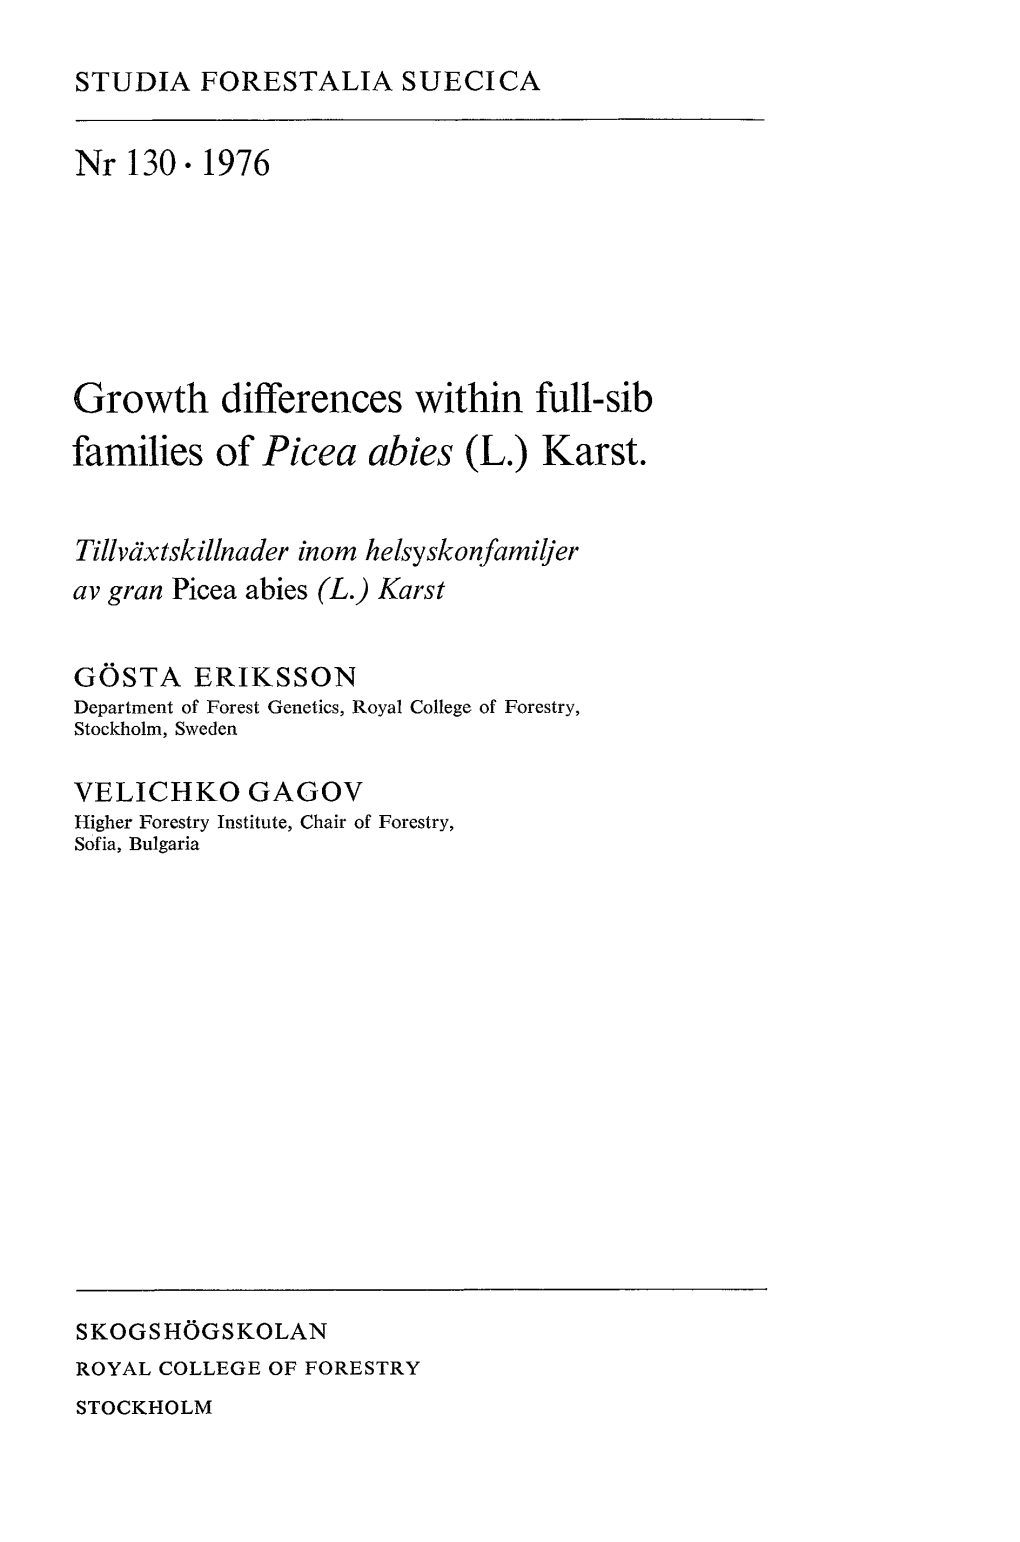 Growth Differences Within Full-Sib Families of Picea Abies (L.) Karst